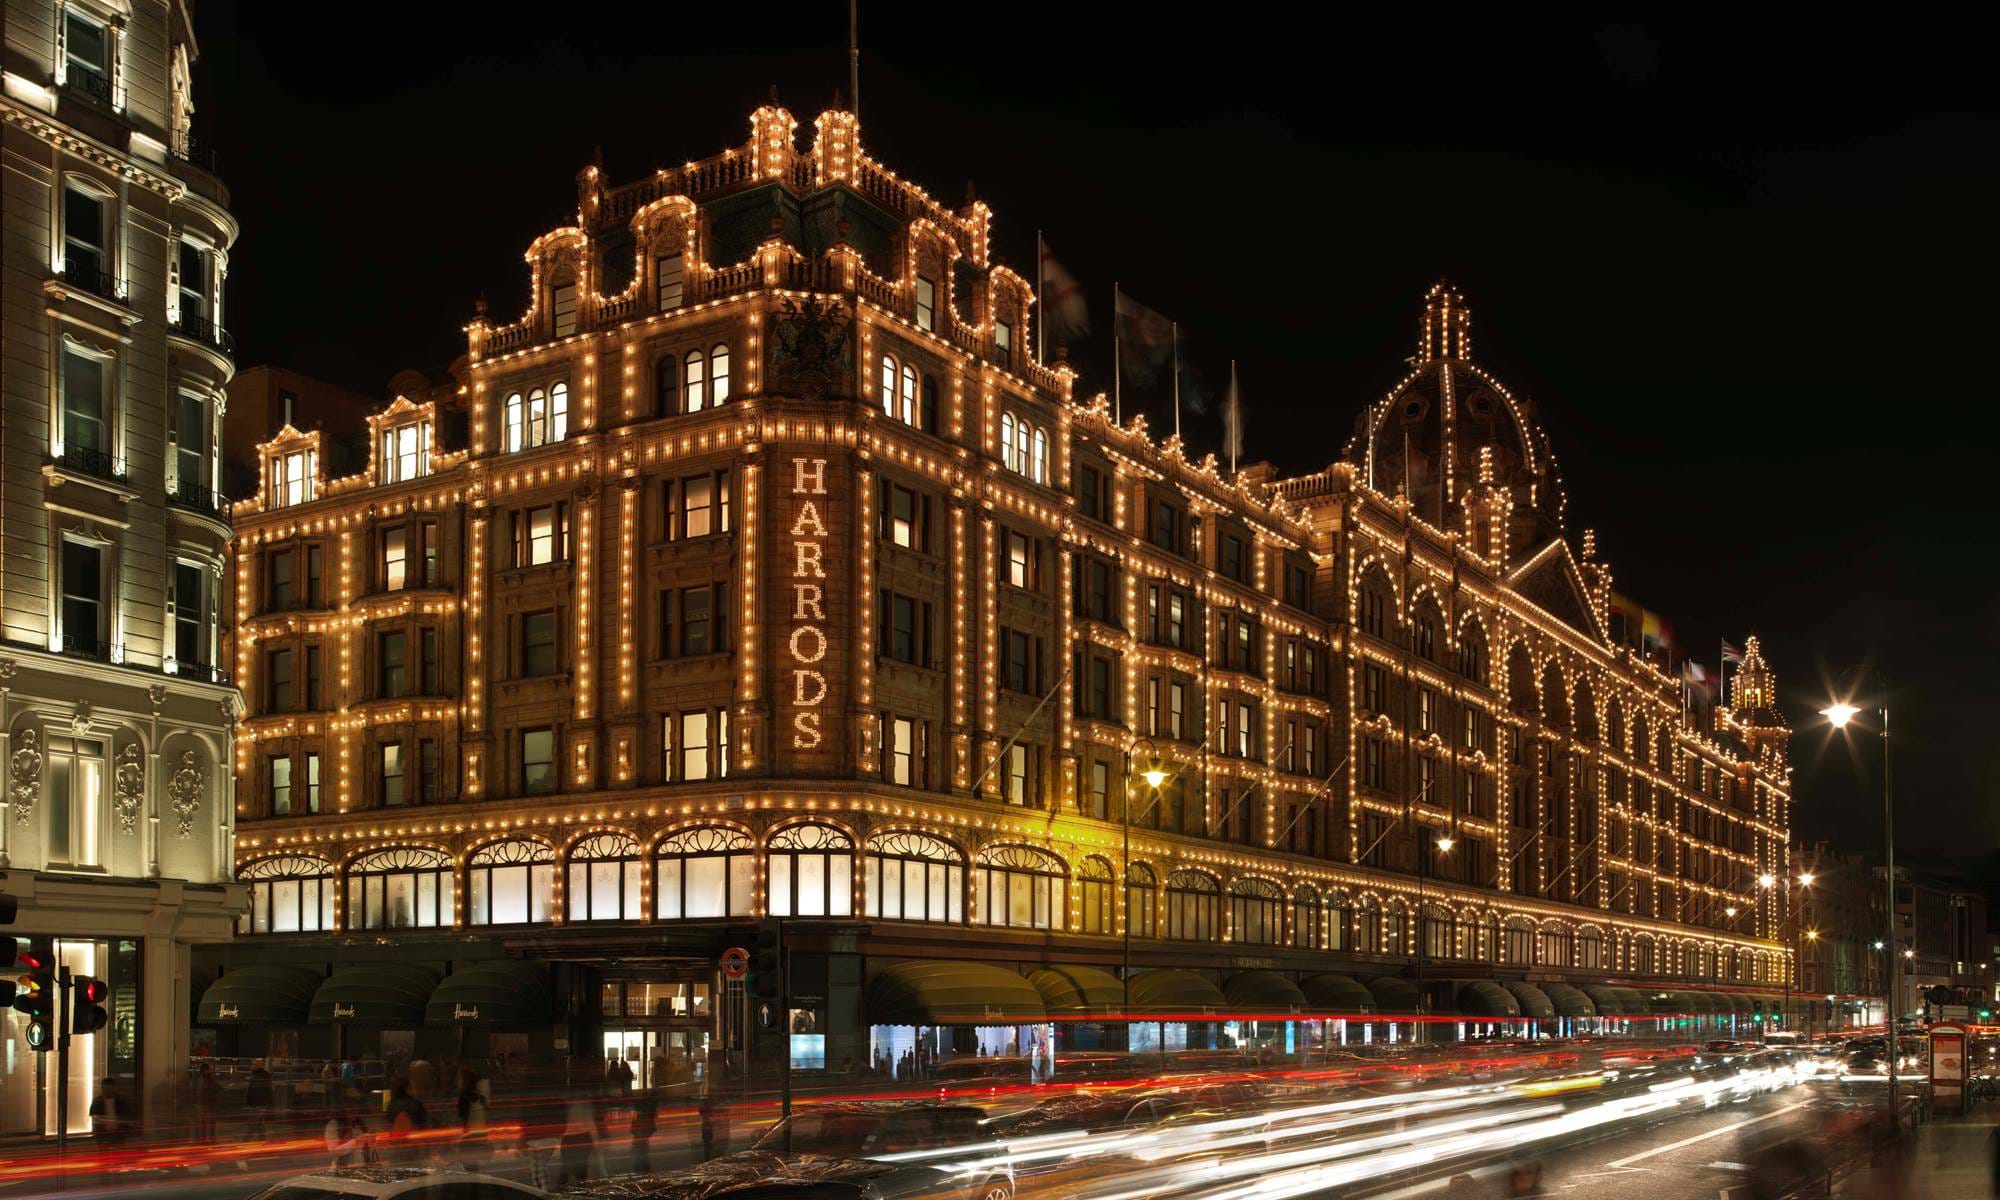 Exterior view of Harrods at night time